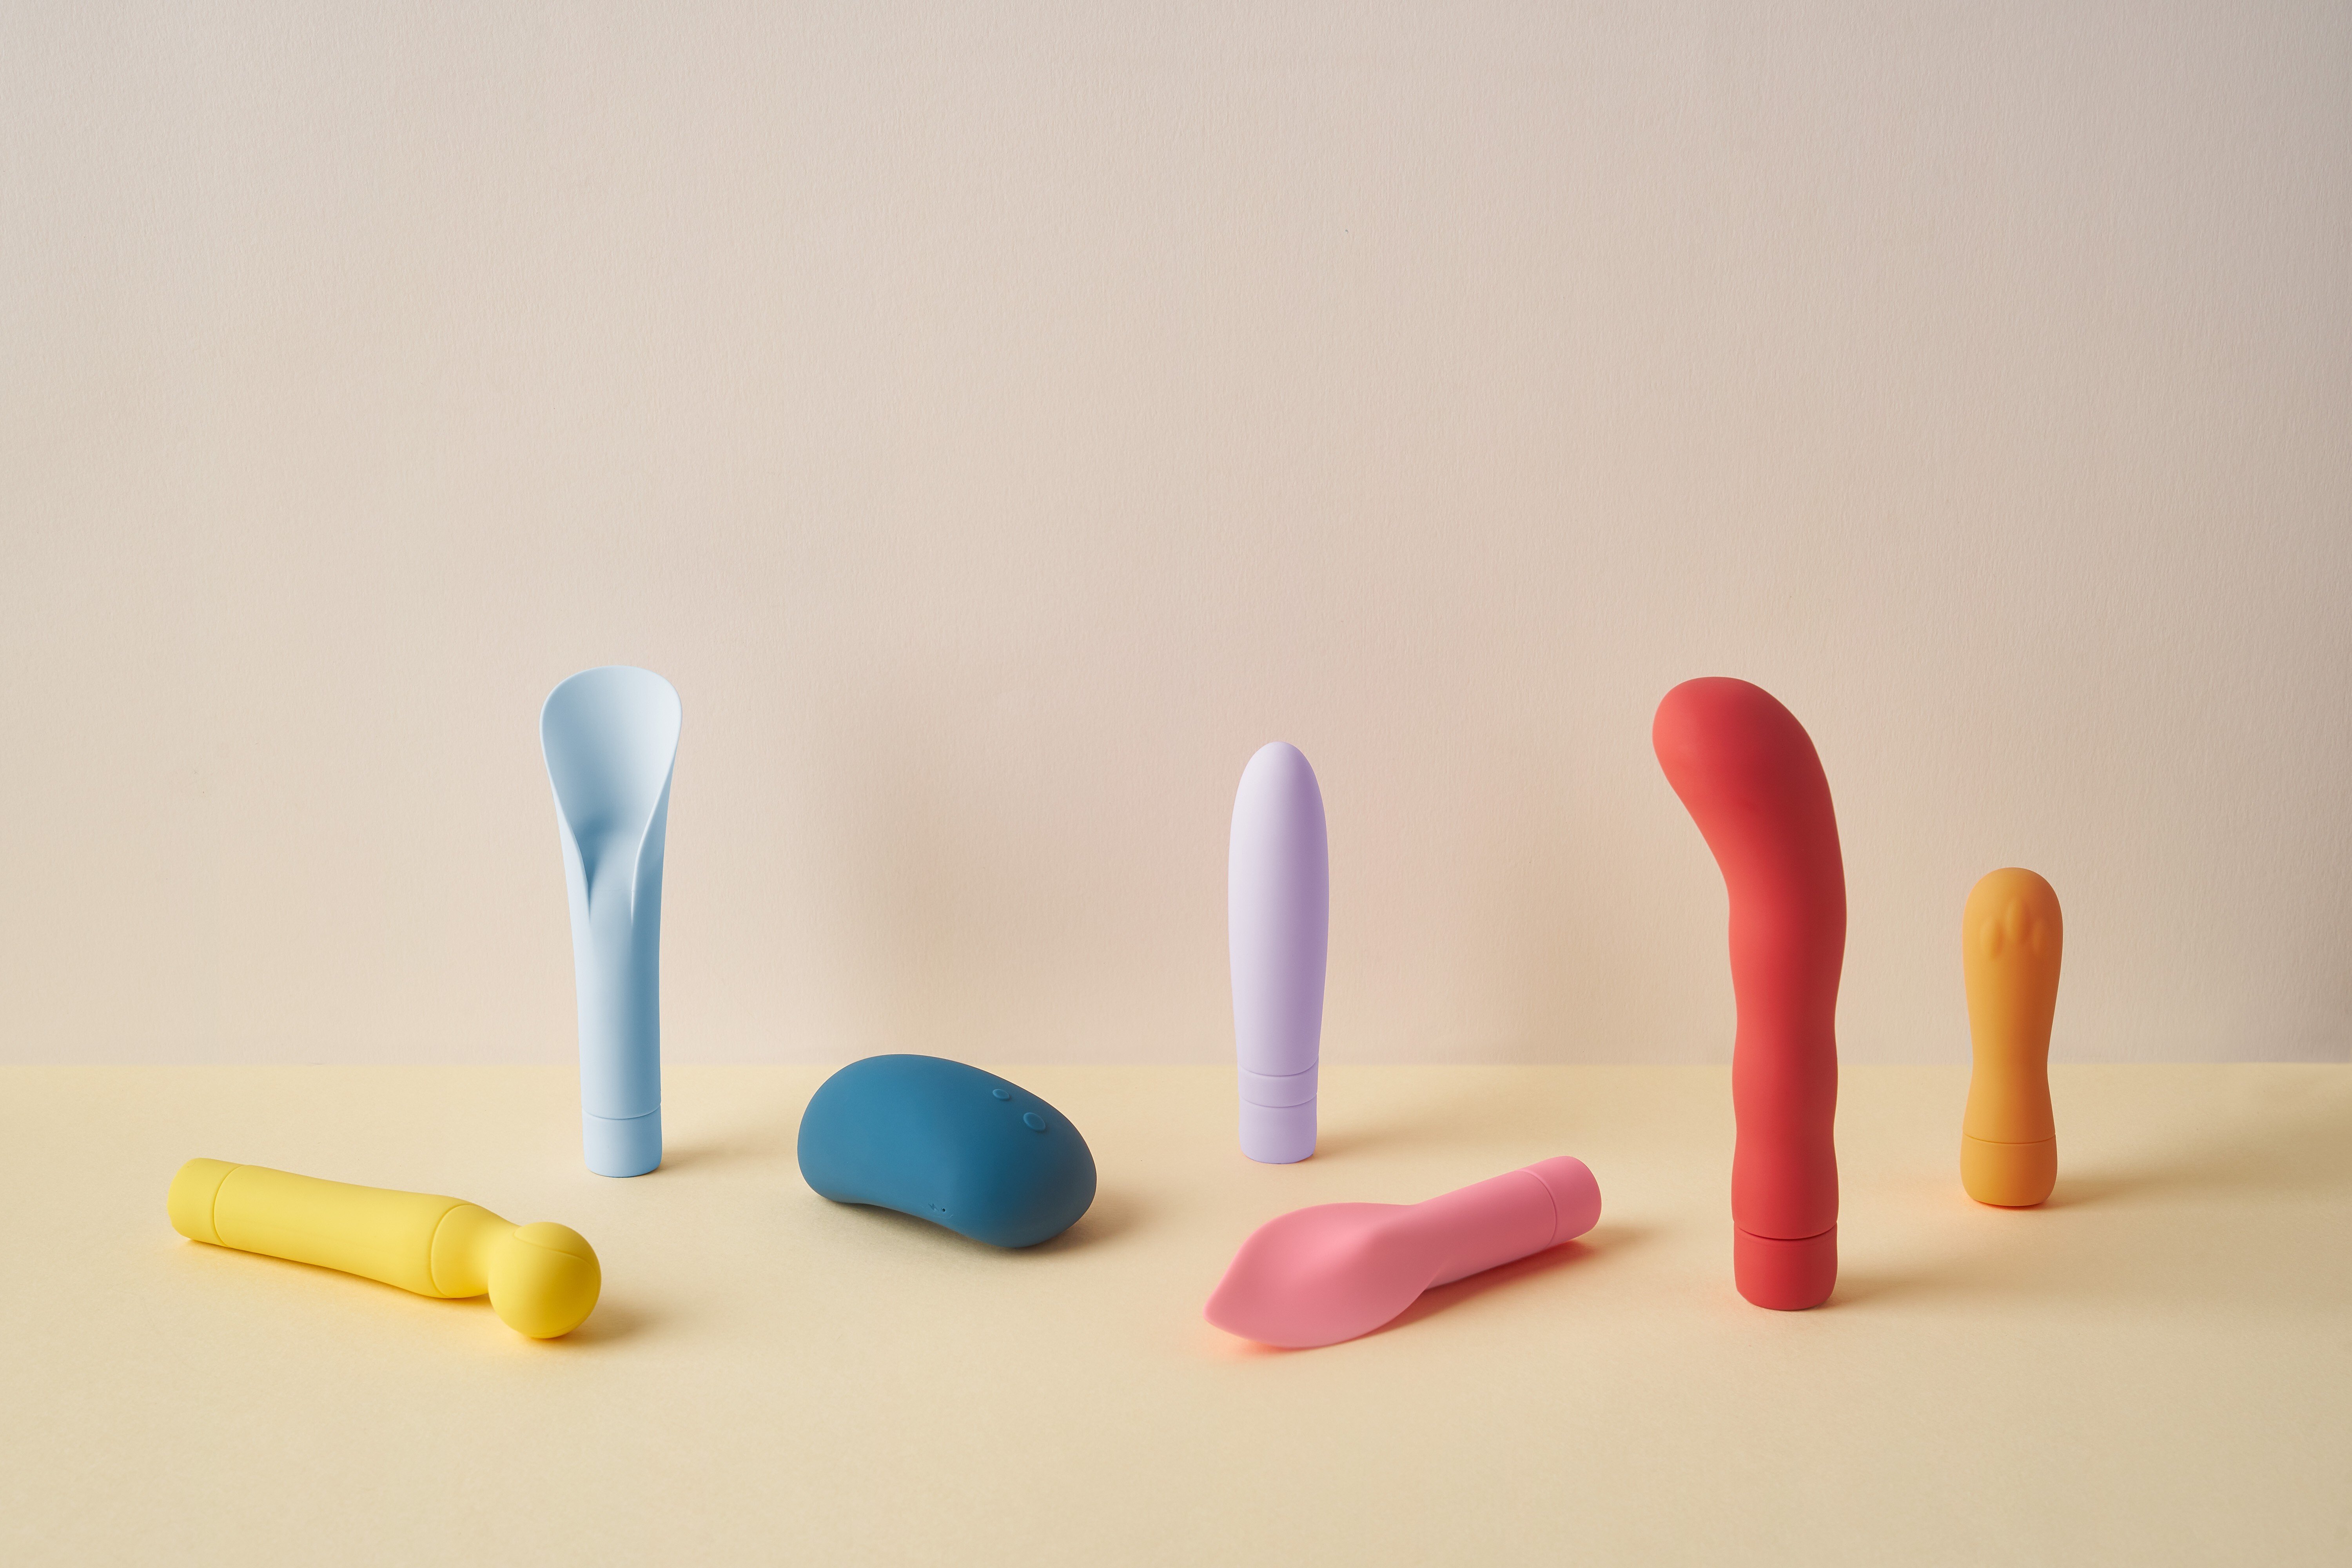 Vibrators and other sex toys by Singaporean adult brand Smile Makers aren’t stocked in sleazy sex shops, but in mainstream department stores – the idea being to normalise discussions about female sexuality. Photo: Smile Makers